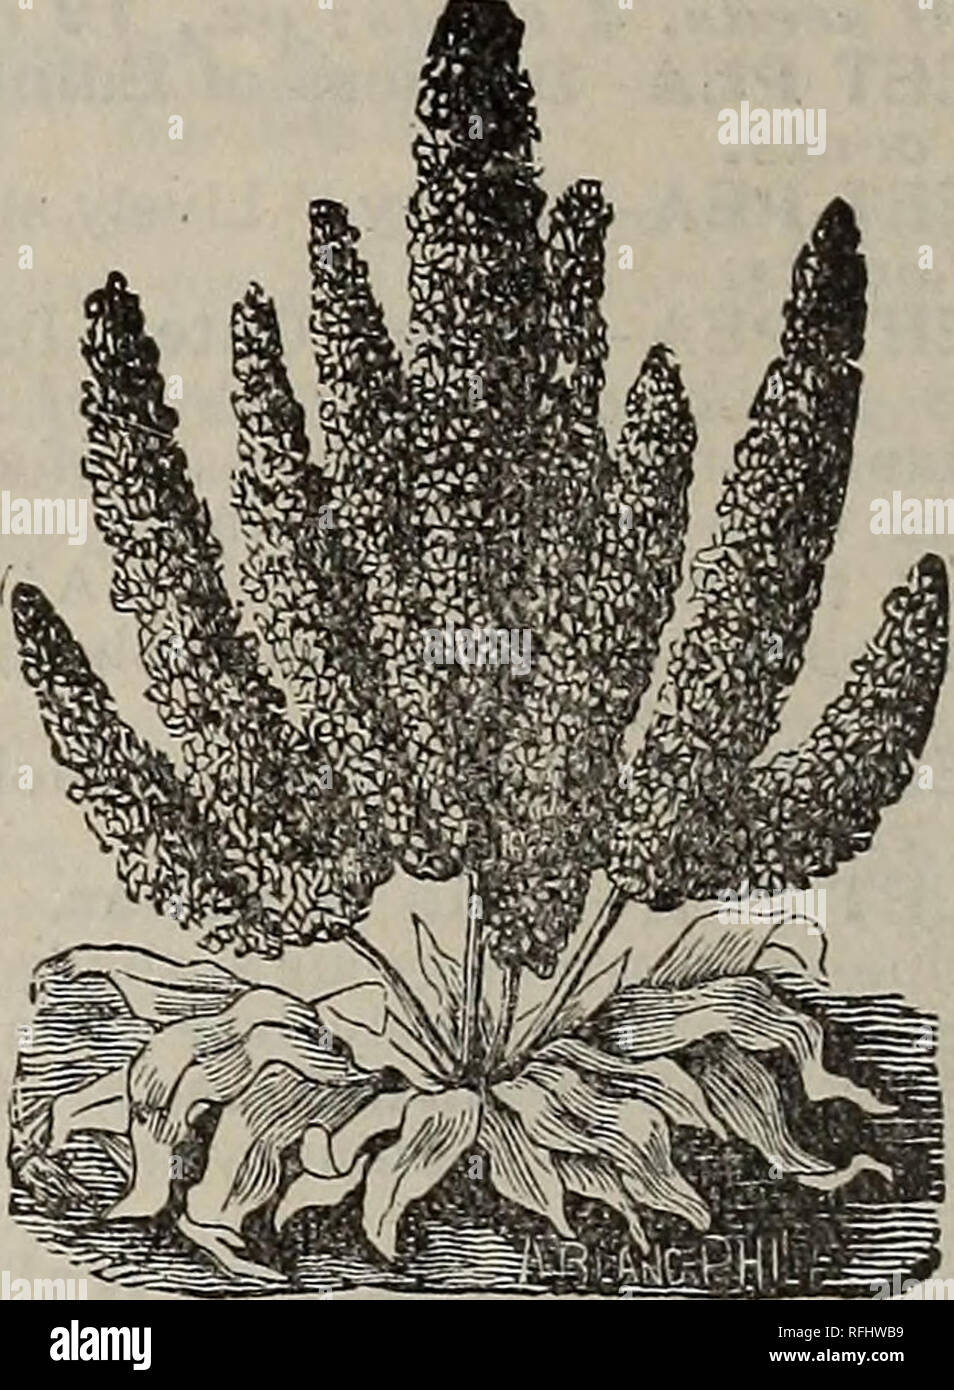 Flowers 1900 Crocker S Flower Seeds Nursery Stock Kansas Catalogs Flowers Seeds Catalogs Salpiclossis Grandiflora The Graceful Flowers Of This Very Showy Bedding Or Border Plant Are Funnel Shaped And Richly Colored